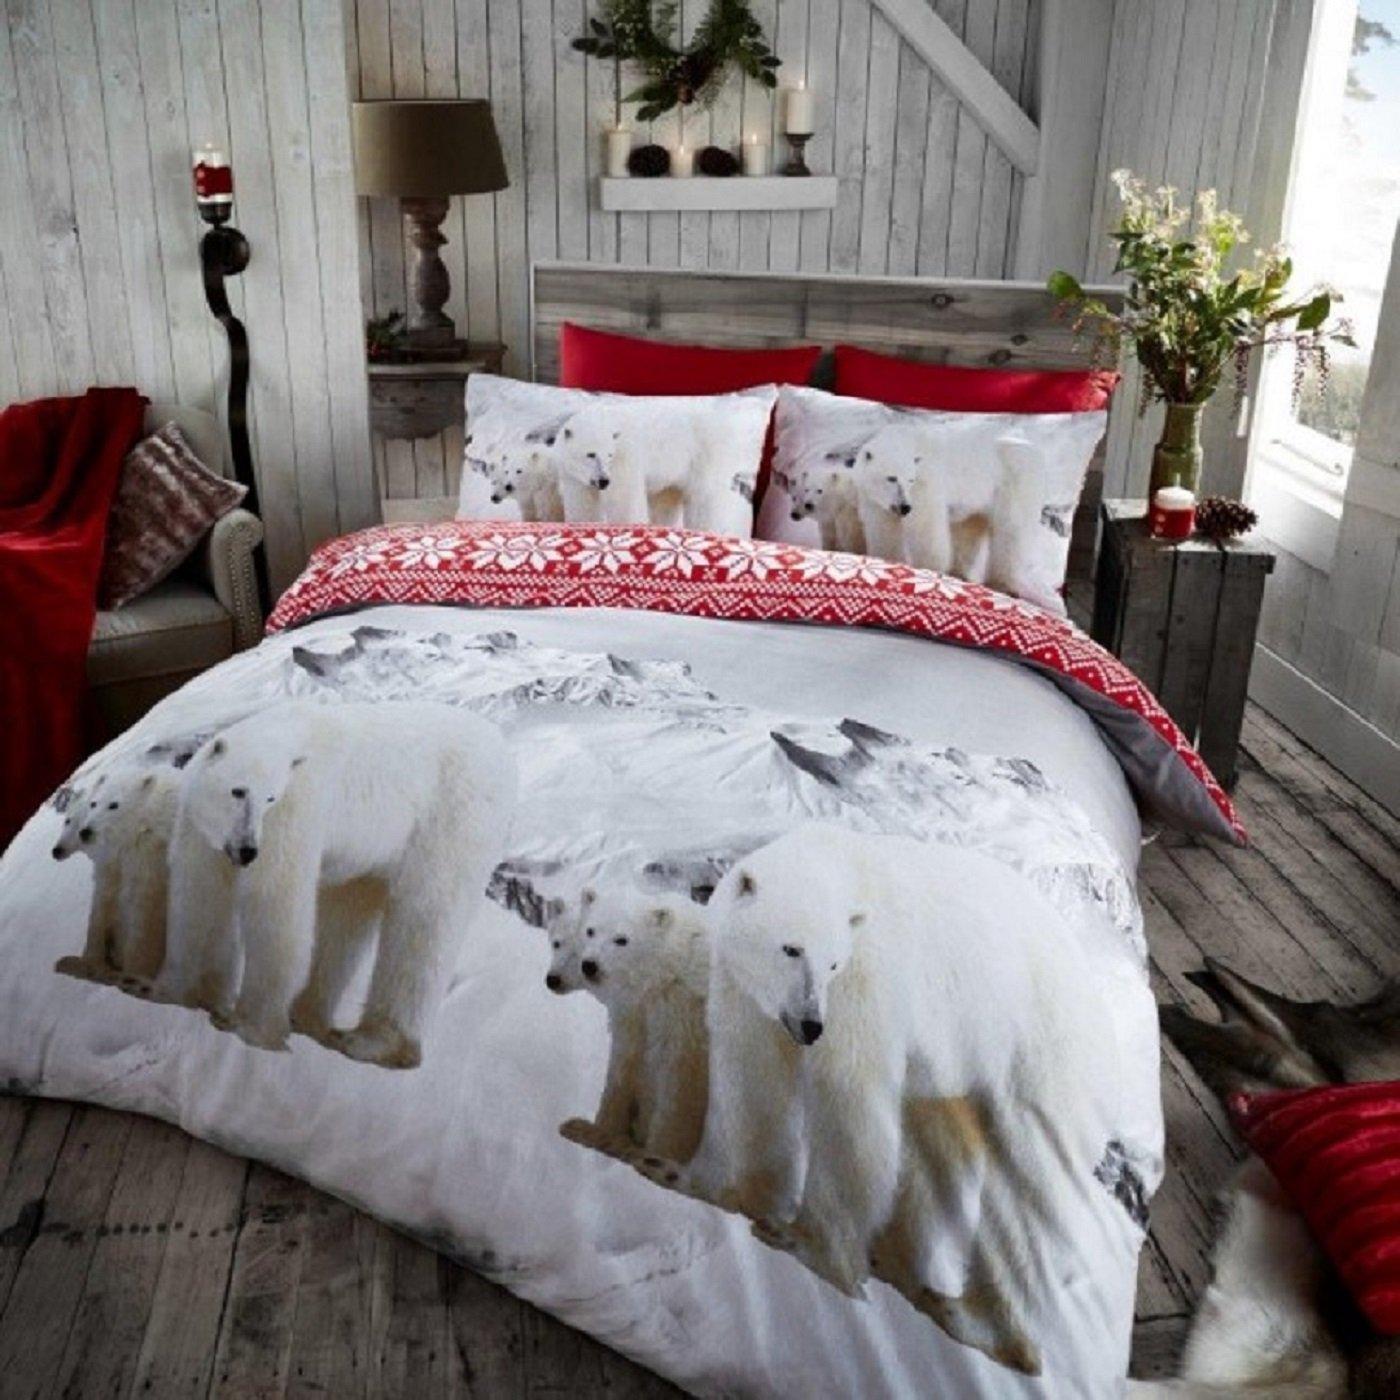 Flannel Printed Duvet Cover With Pillowcases